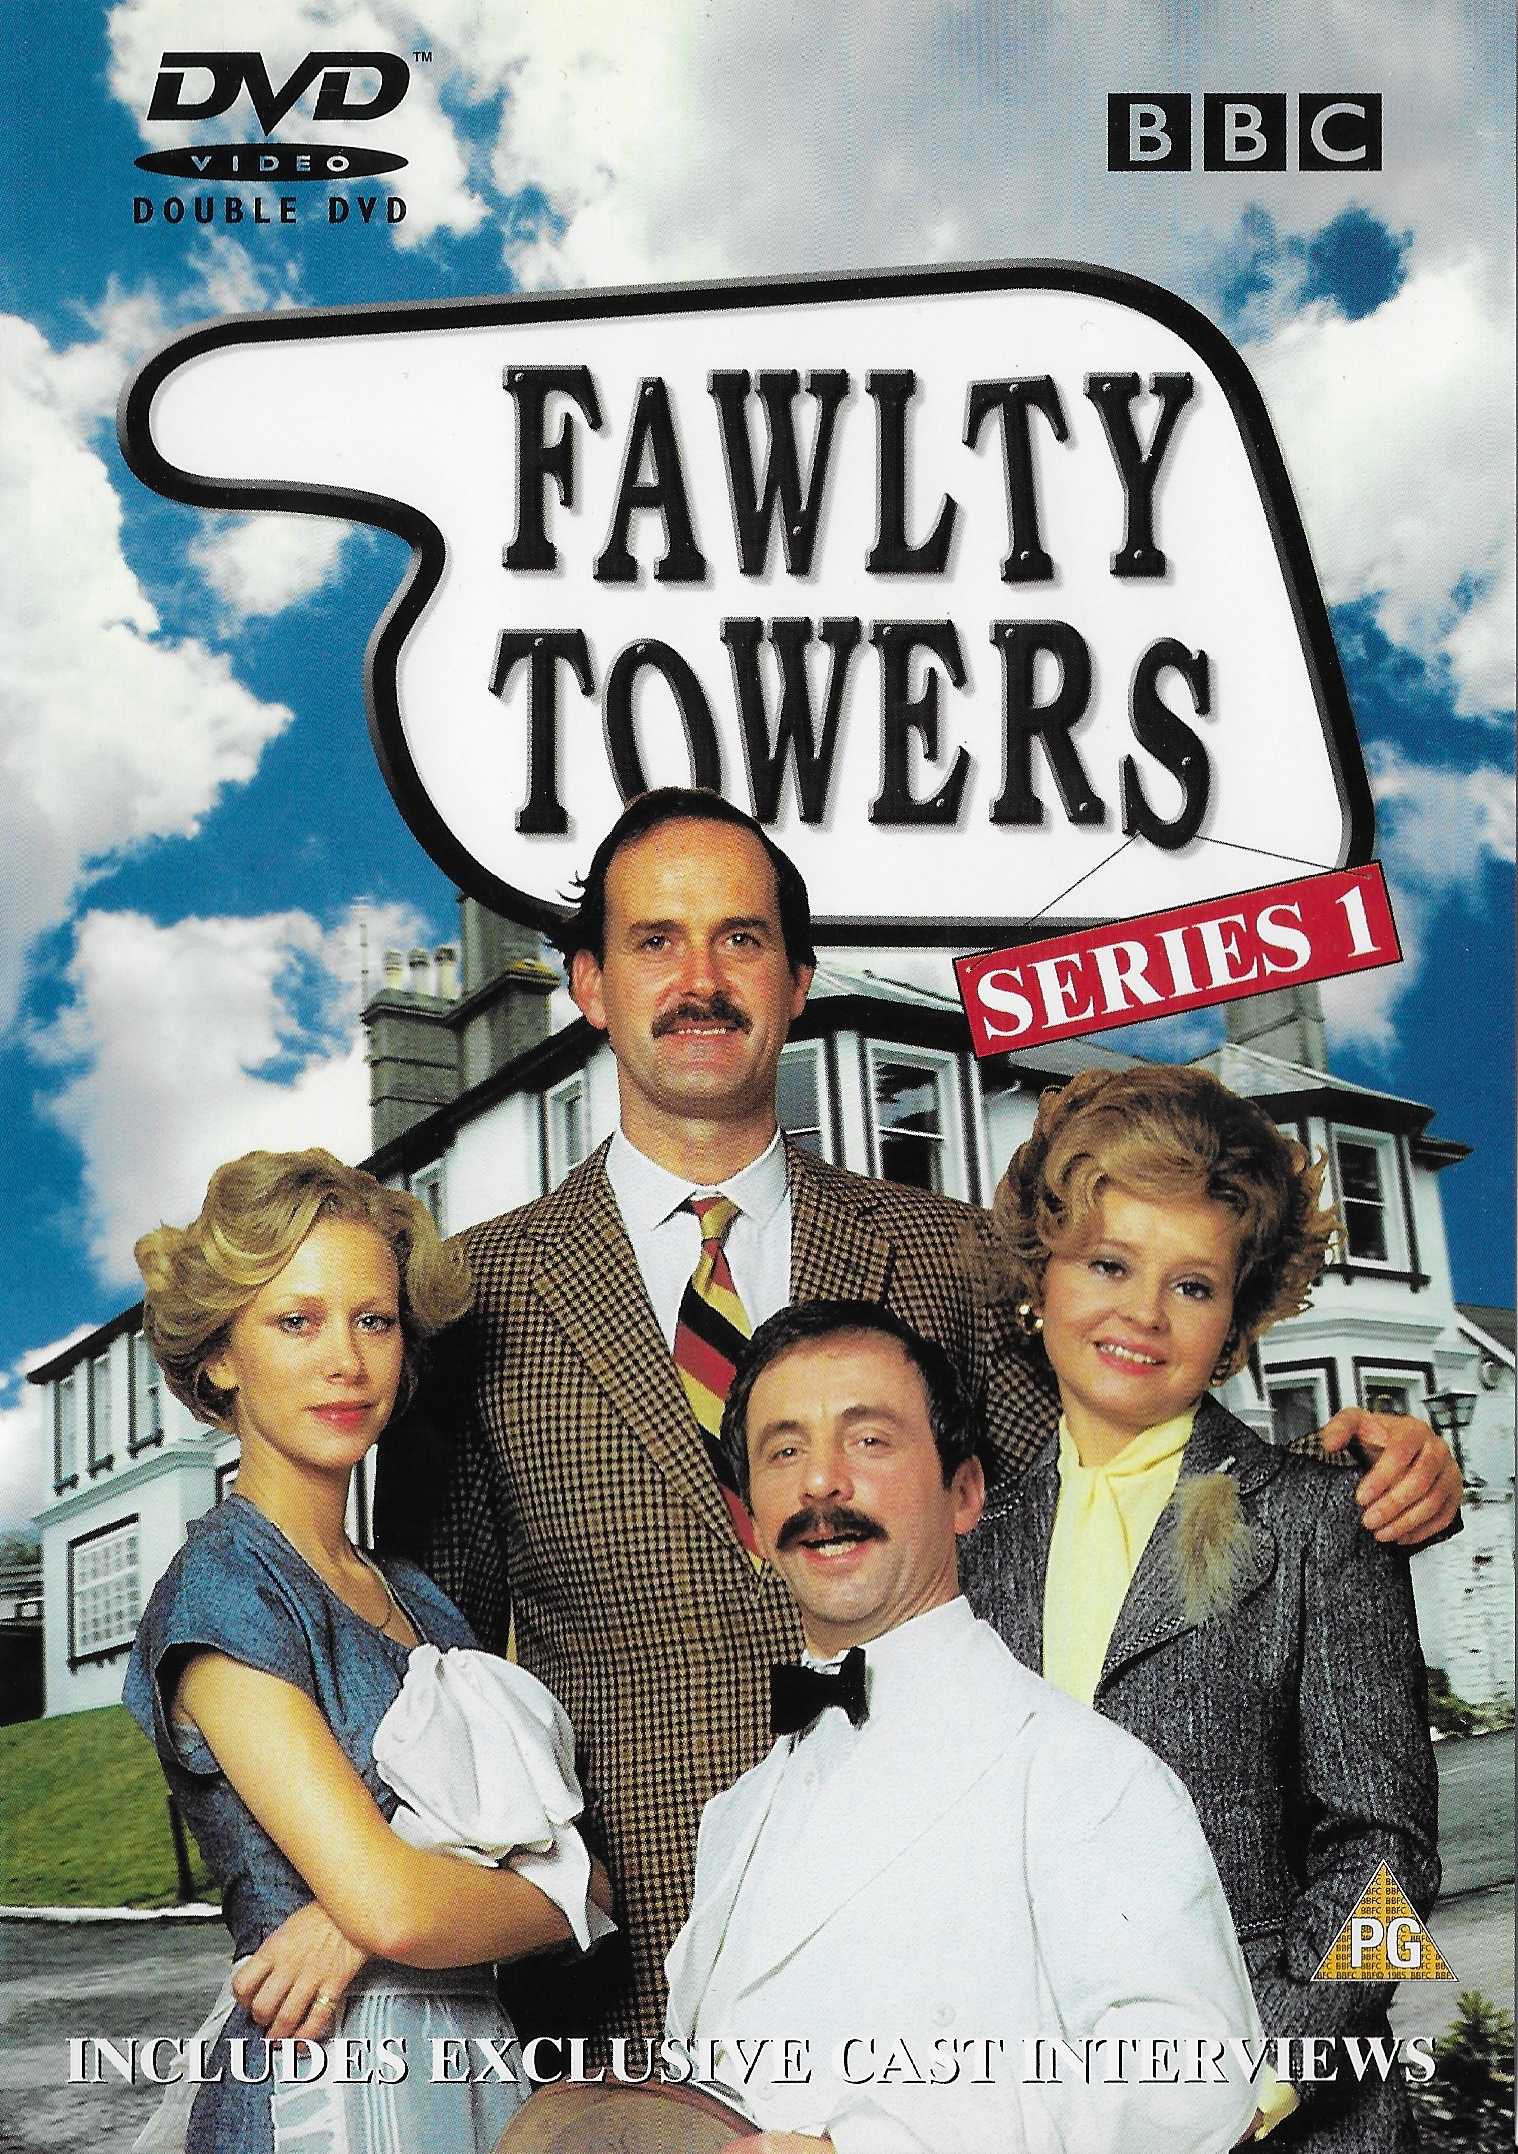 Picture of BBCDVD 1064 Fawlty Towers - Series 1 by artist John Cleese / Connie Booth from the BBC dvds - Records and Tapes library